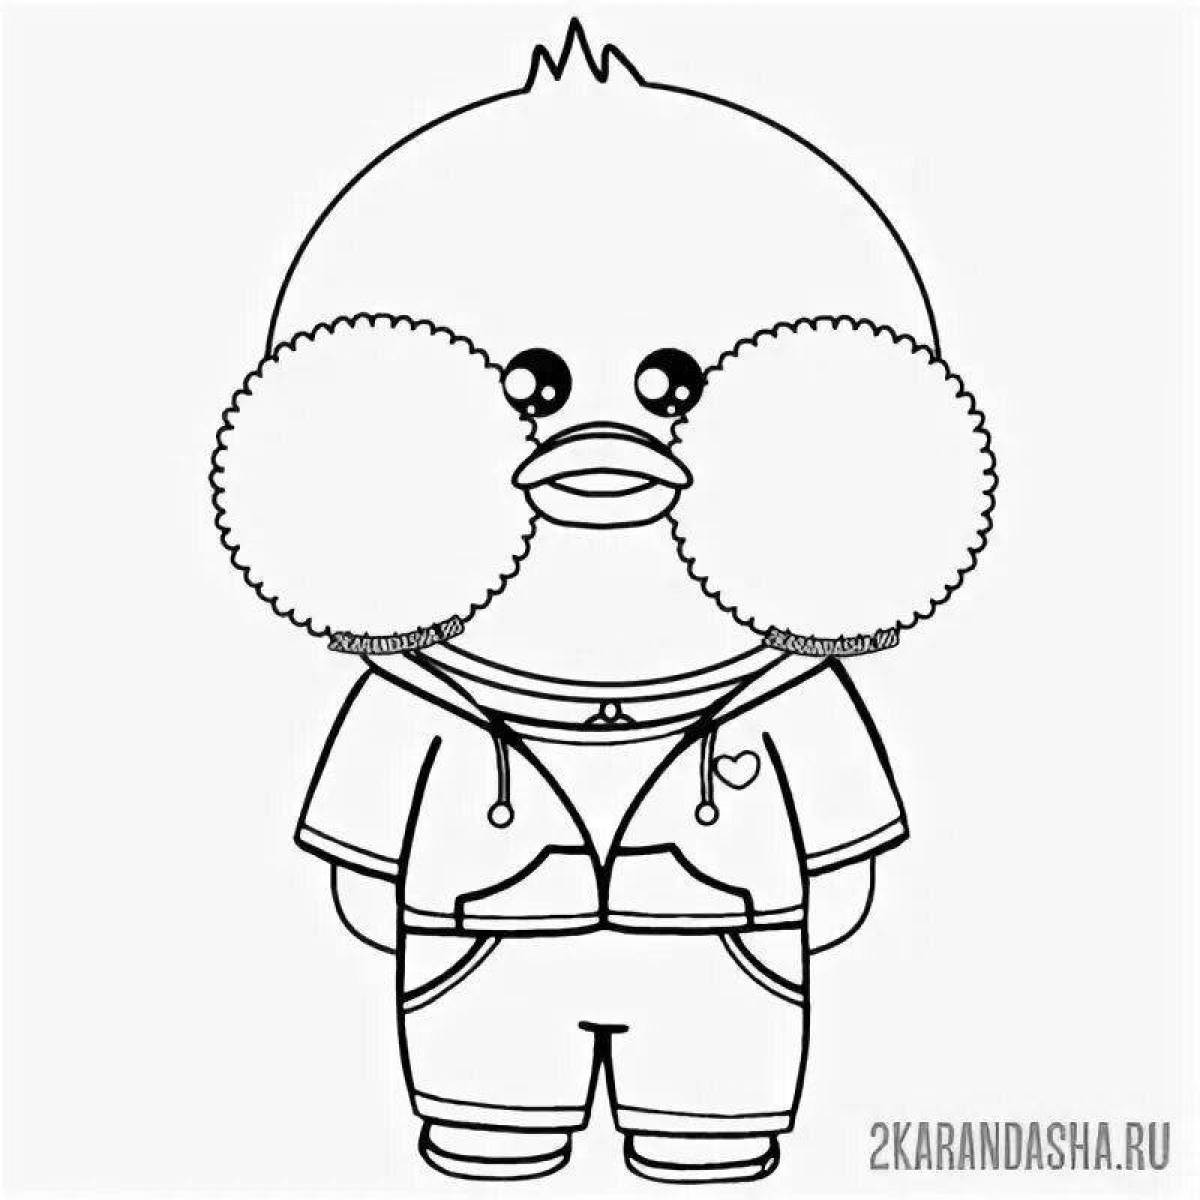 Lalalafanfan nice duck coloring page